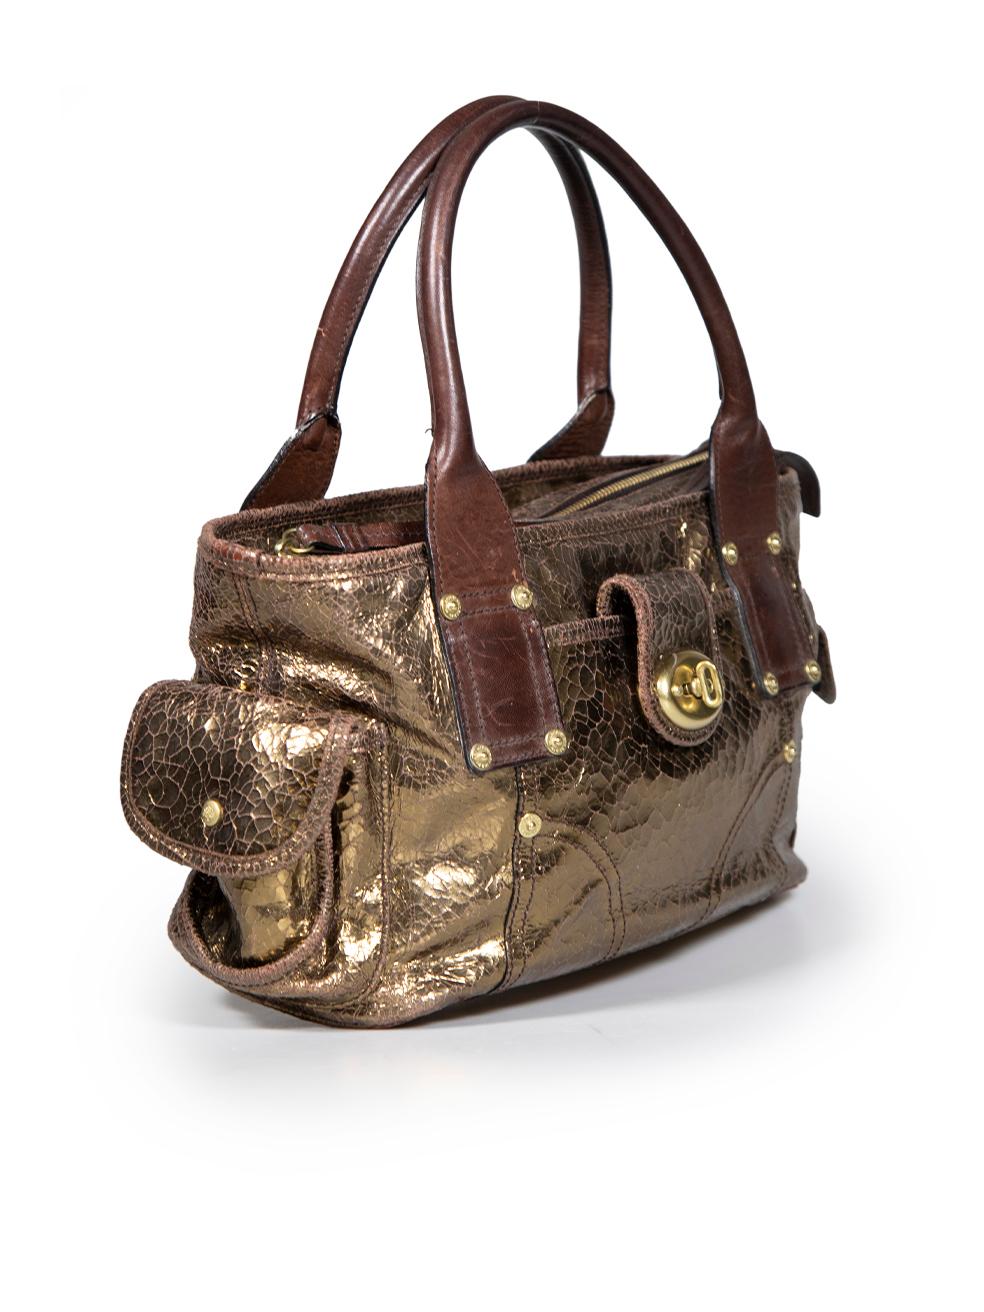 CONDITION is Good. General wear to bag is evident. Moderate signs of abrasion and wear to overall leather especially to the corners and bottom. Scratches and abrasion to handles, zipper pull and front clasp hardware on this used Mulberry designer